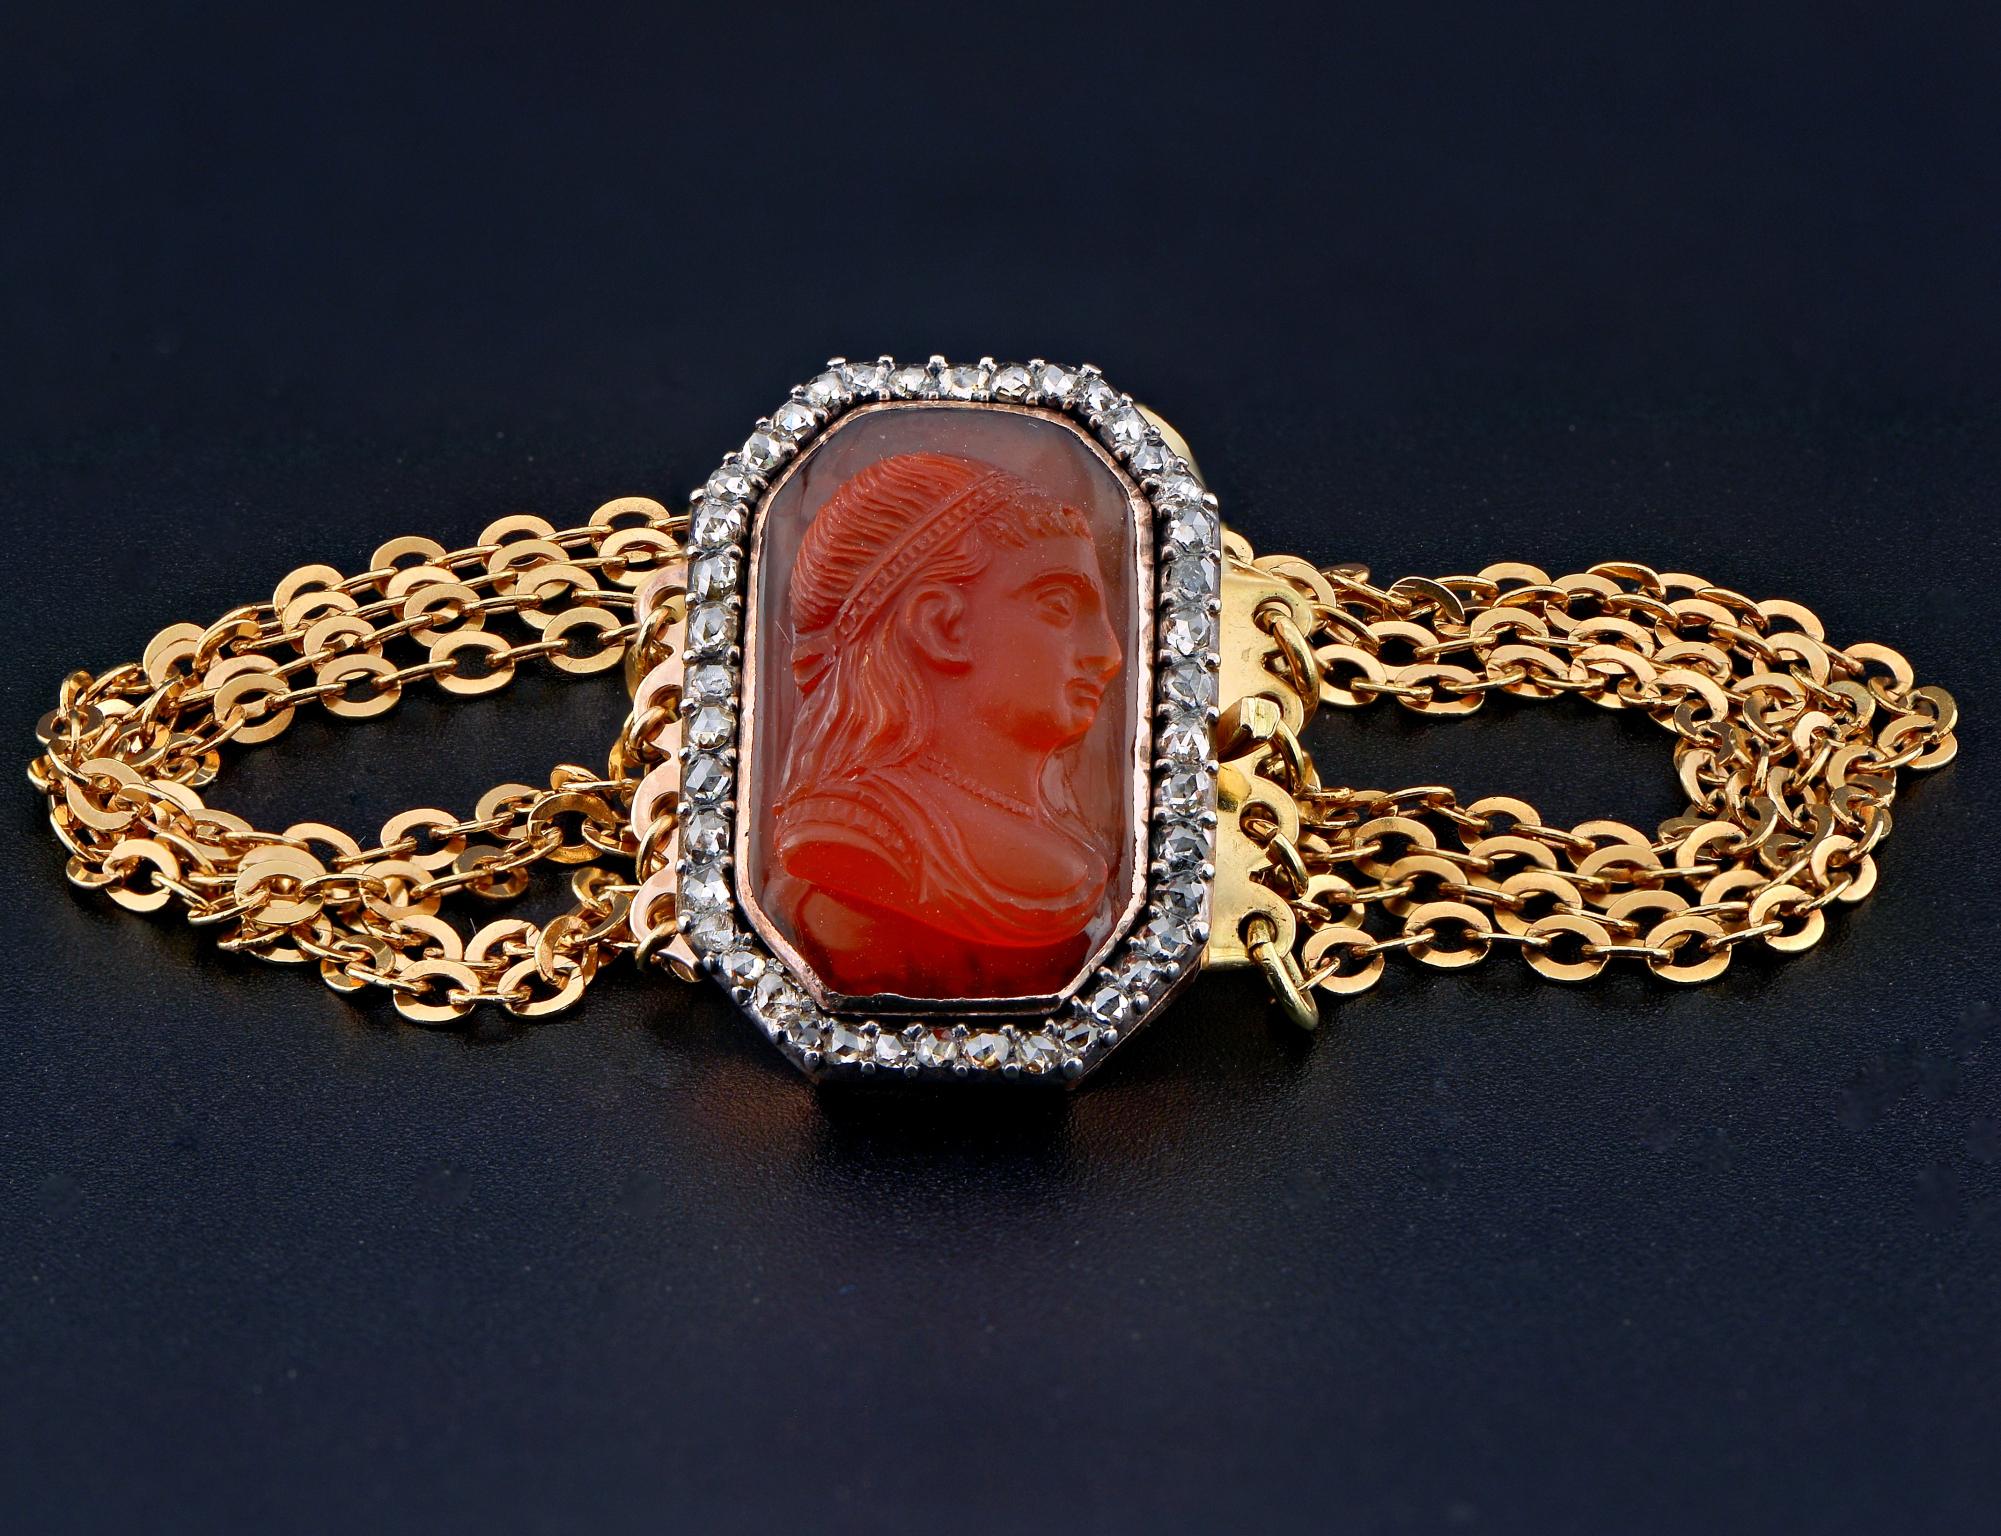 The octagonal clasp is set with Carnelian cameo skillful carving depicting the bust of a neoclassical lady, within a border of rose cut Diamonds giving out lovely sparkle and white twinkling Diamond light – approx .60 Ct of Diamond content
Dates